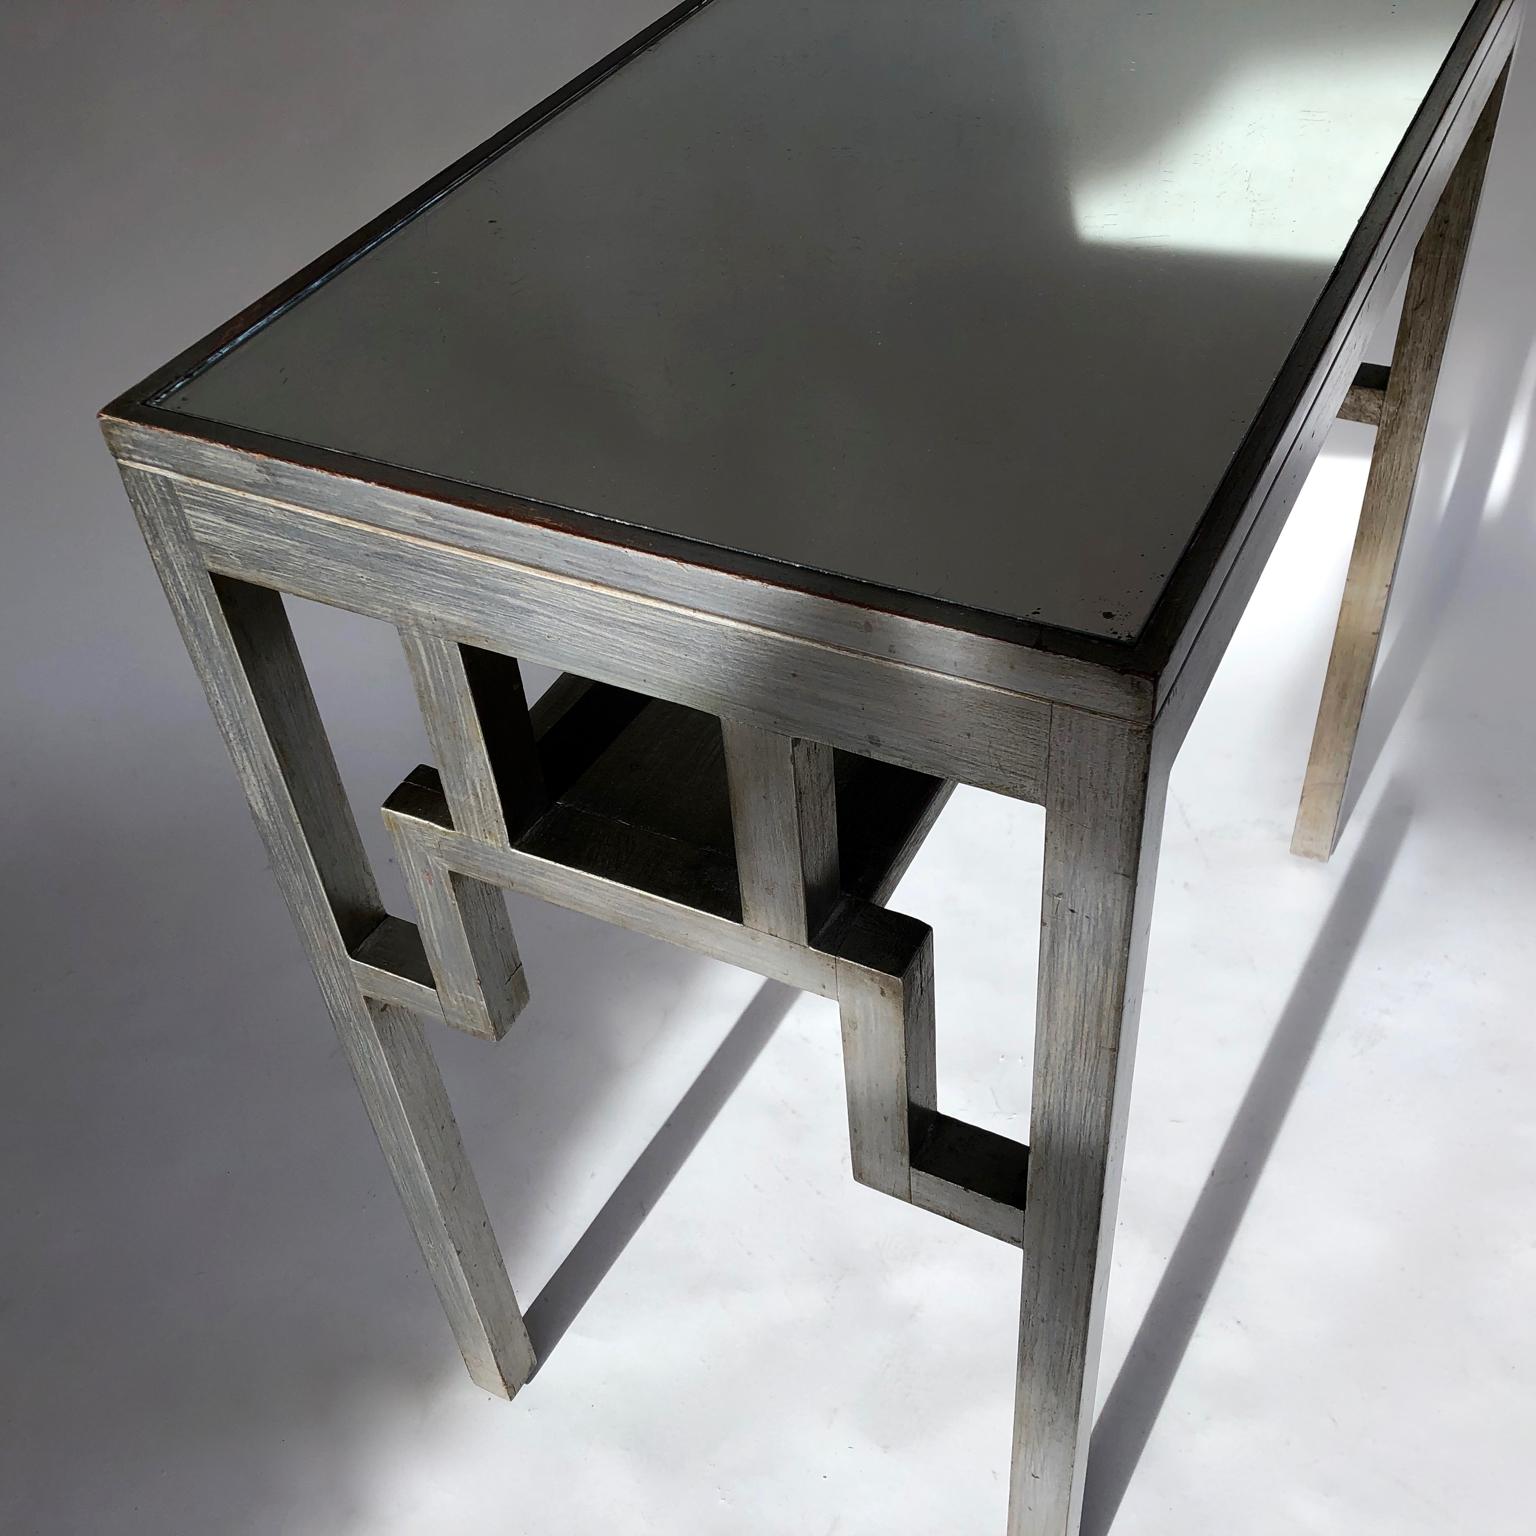 Rare 1920s to 1940s Japanesque silvered wooden console, table, vanity or small desk by Rowley, London. Mirrored top with small shelf underneath. Rowley label. Beautifully worn modernist look, typical of the Rowley Gallery furniture of the period.